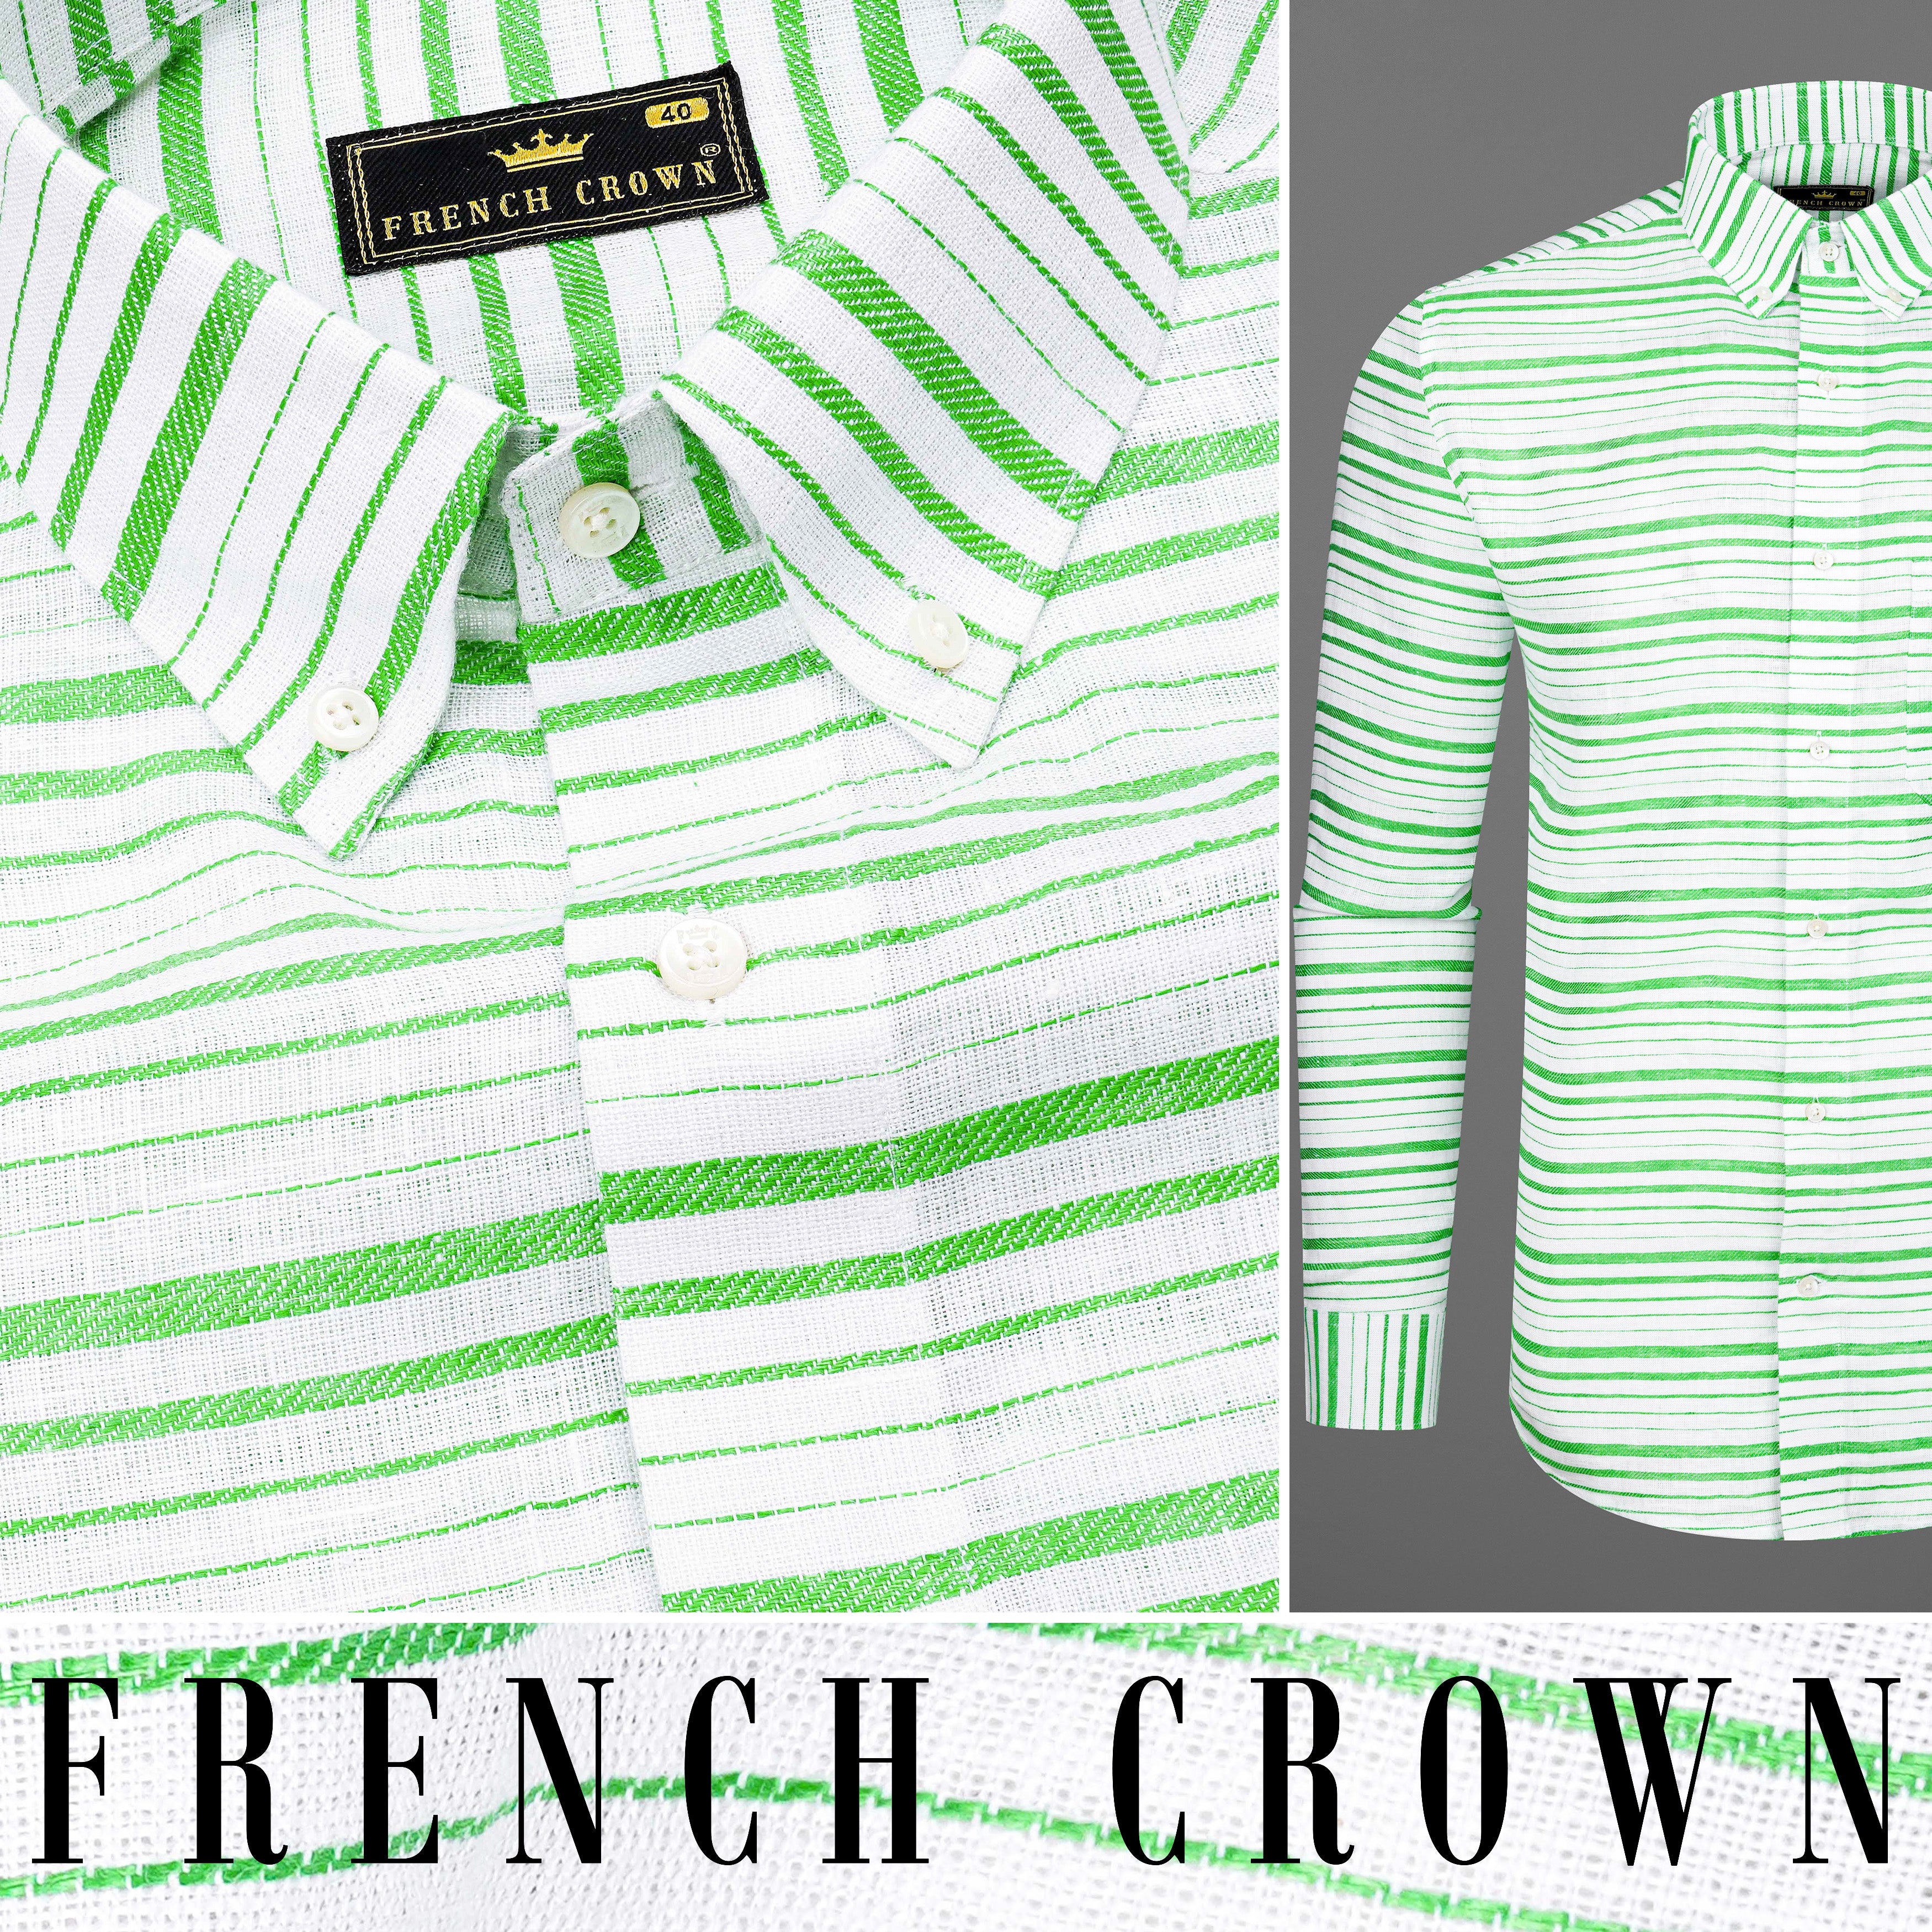 Bright White and Chateau Green Striped Luxurious Linen Shirt